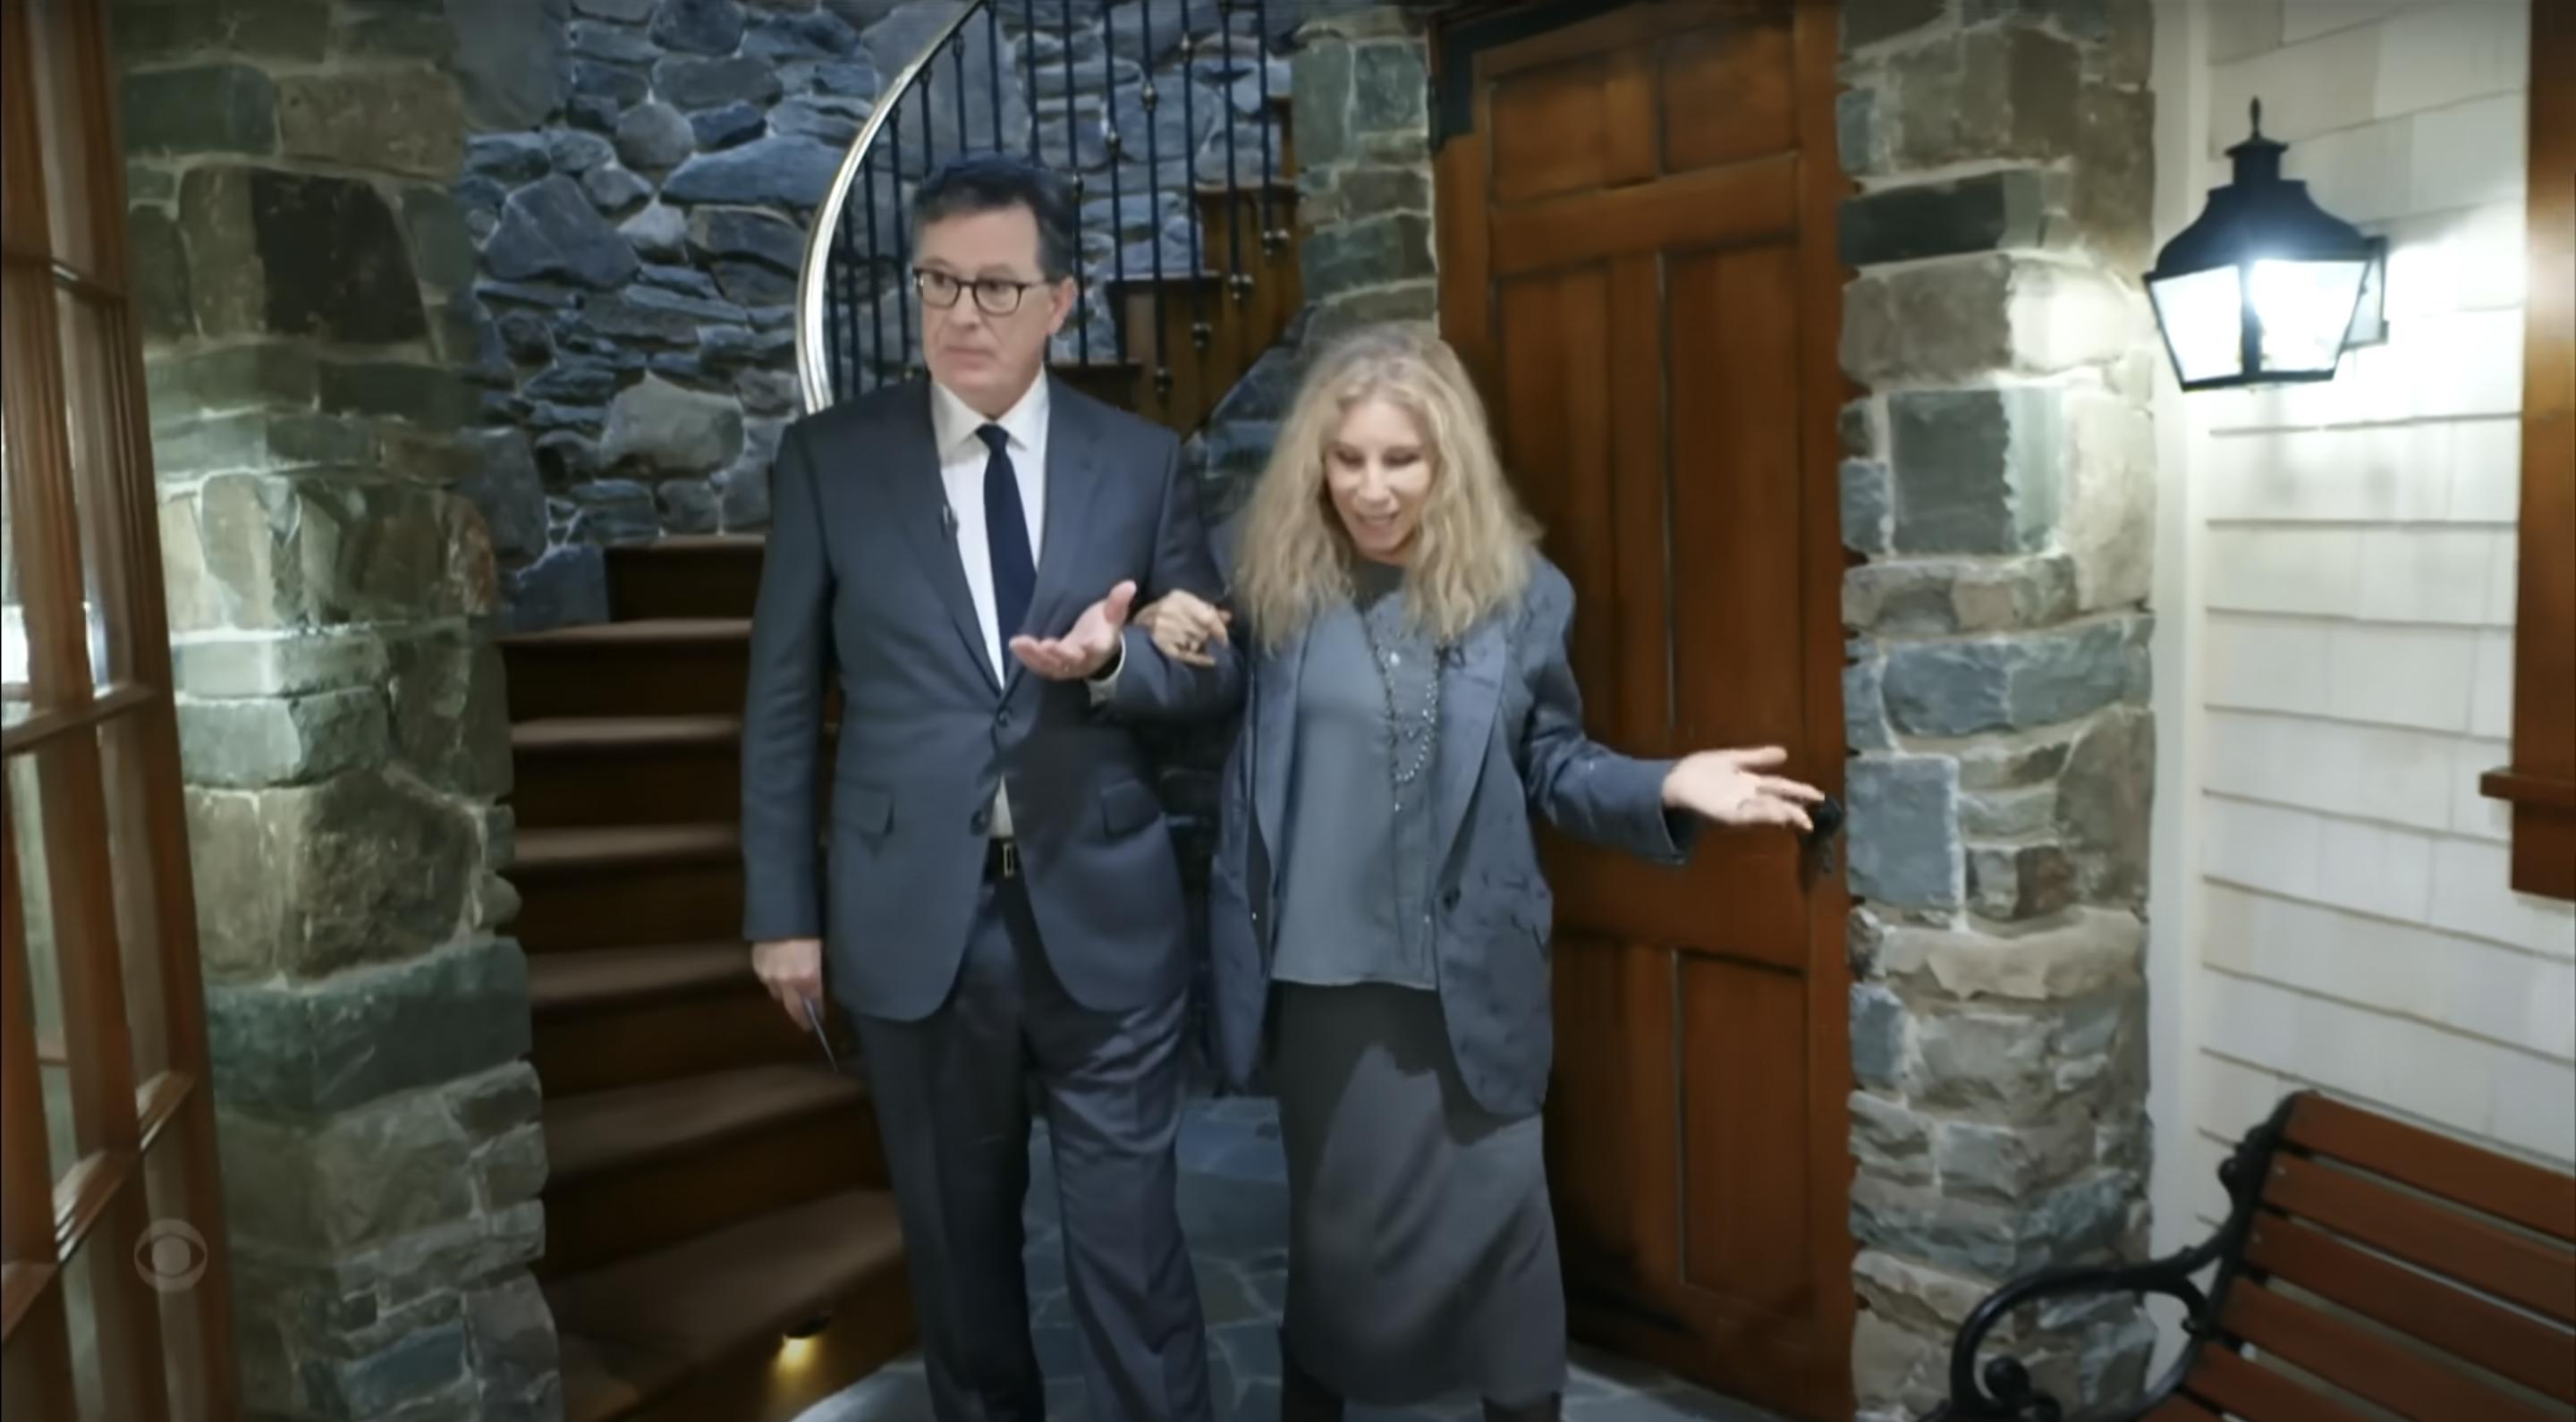 Barbra Streisand showing Stephen Colbert around her home, posted on November 14, 2023 | Source: YouTube/The Late Show with Stephen Colbert